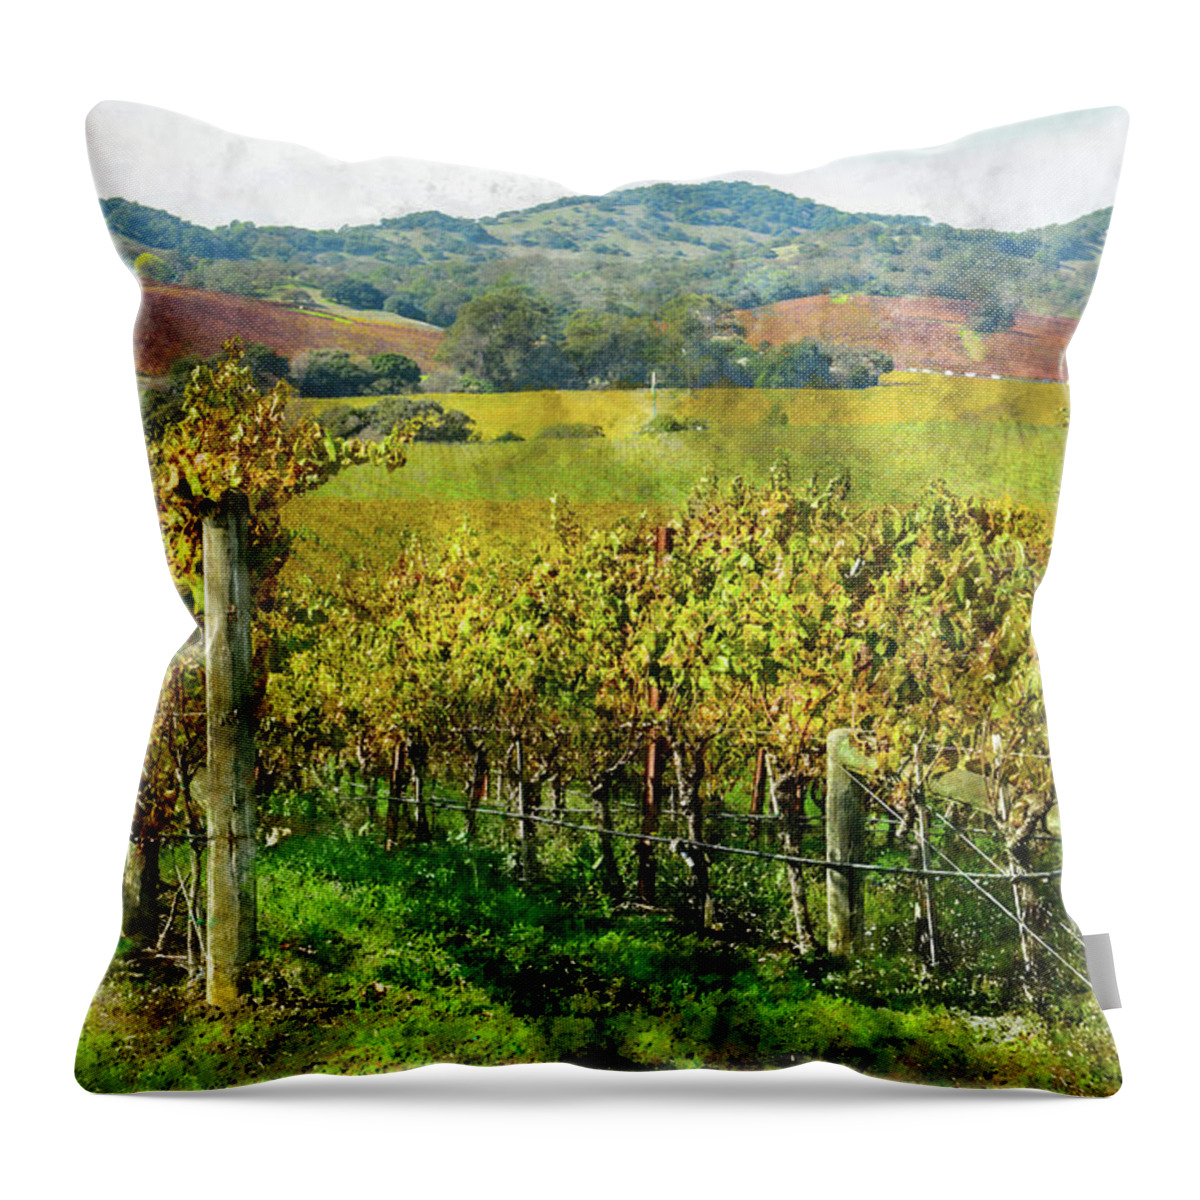 Green Throw Pillow featuring the photograph Napa Valley California Vineyard #16 by Brandon Bourdages